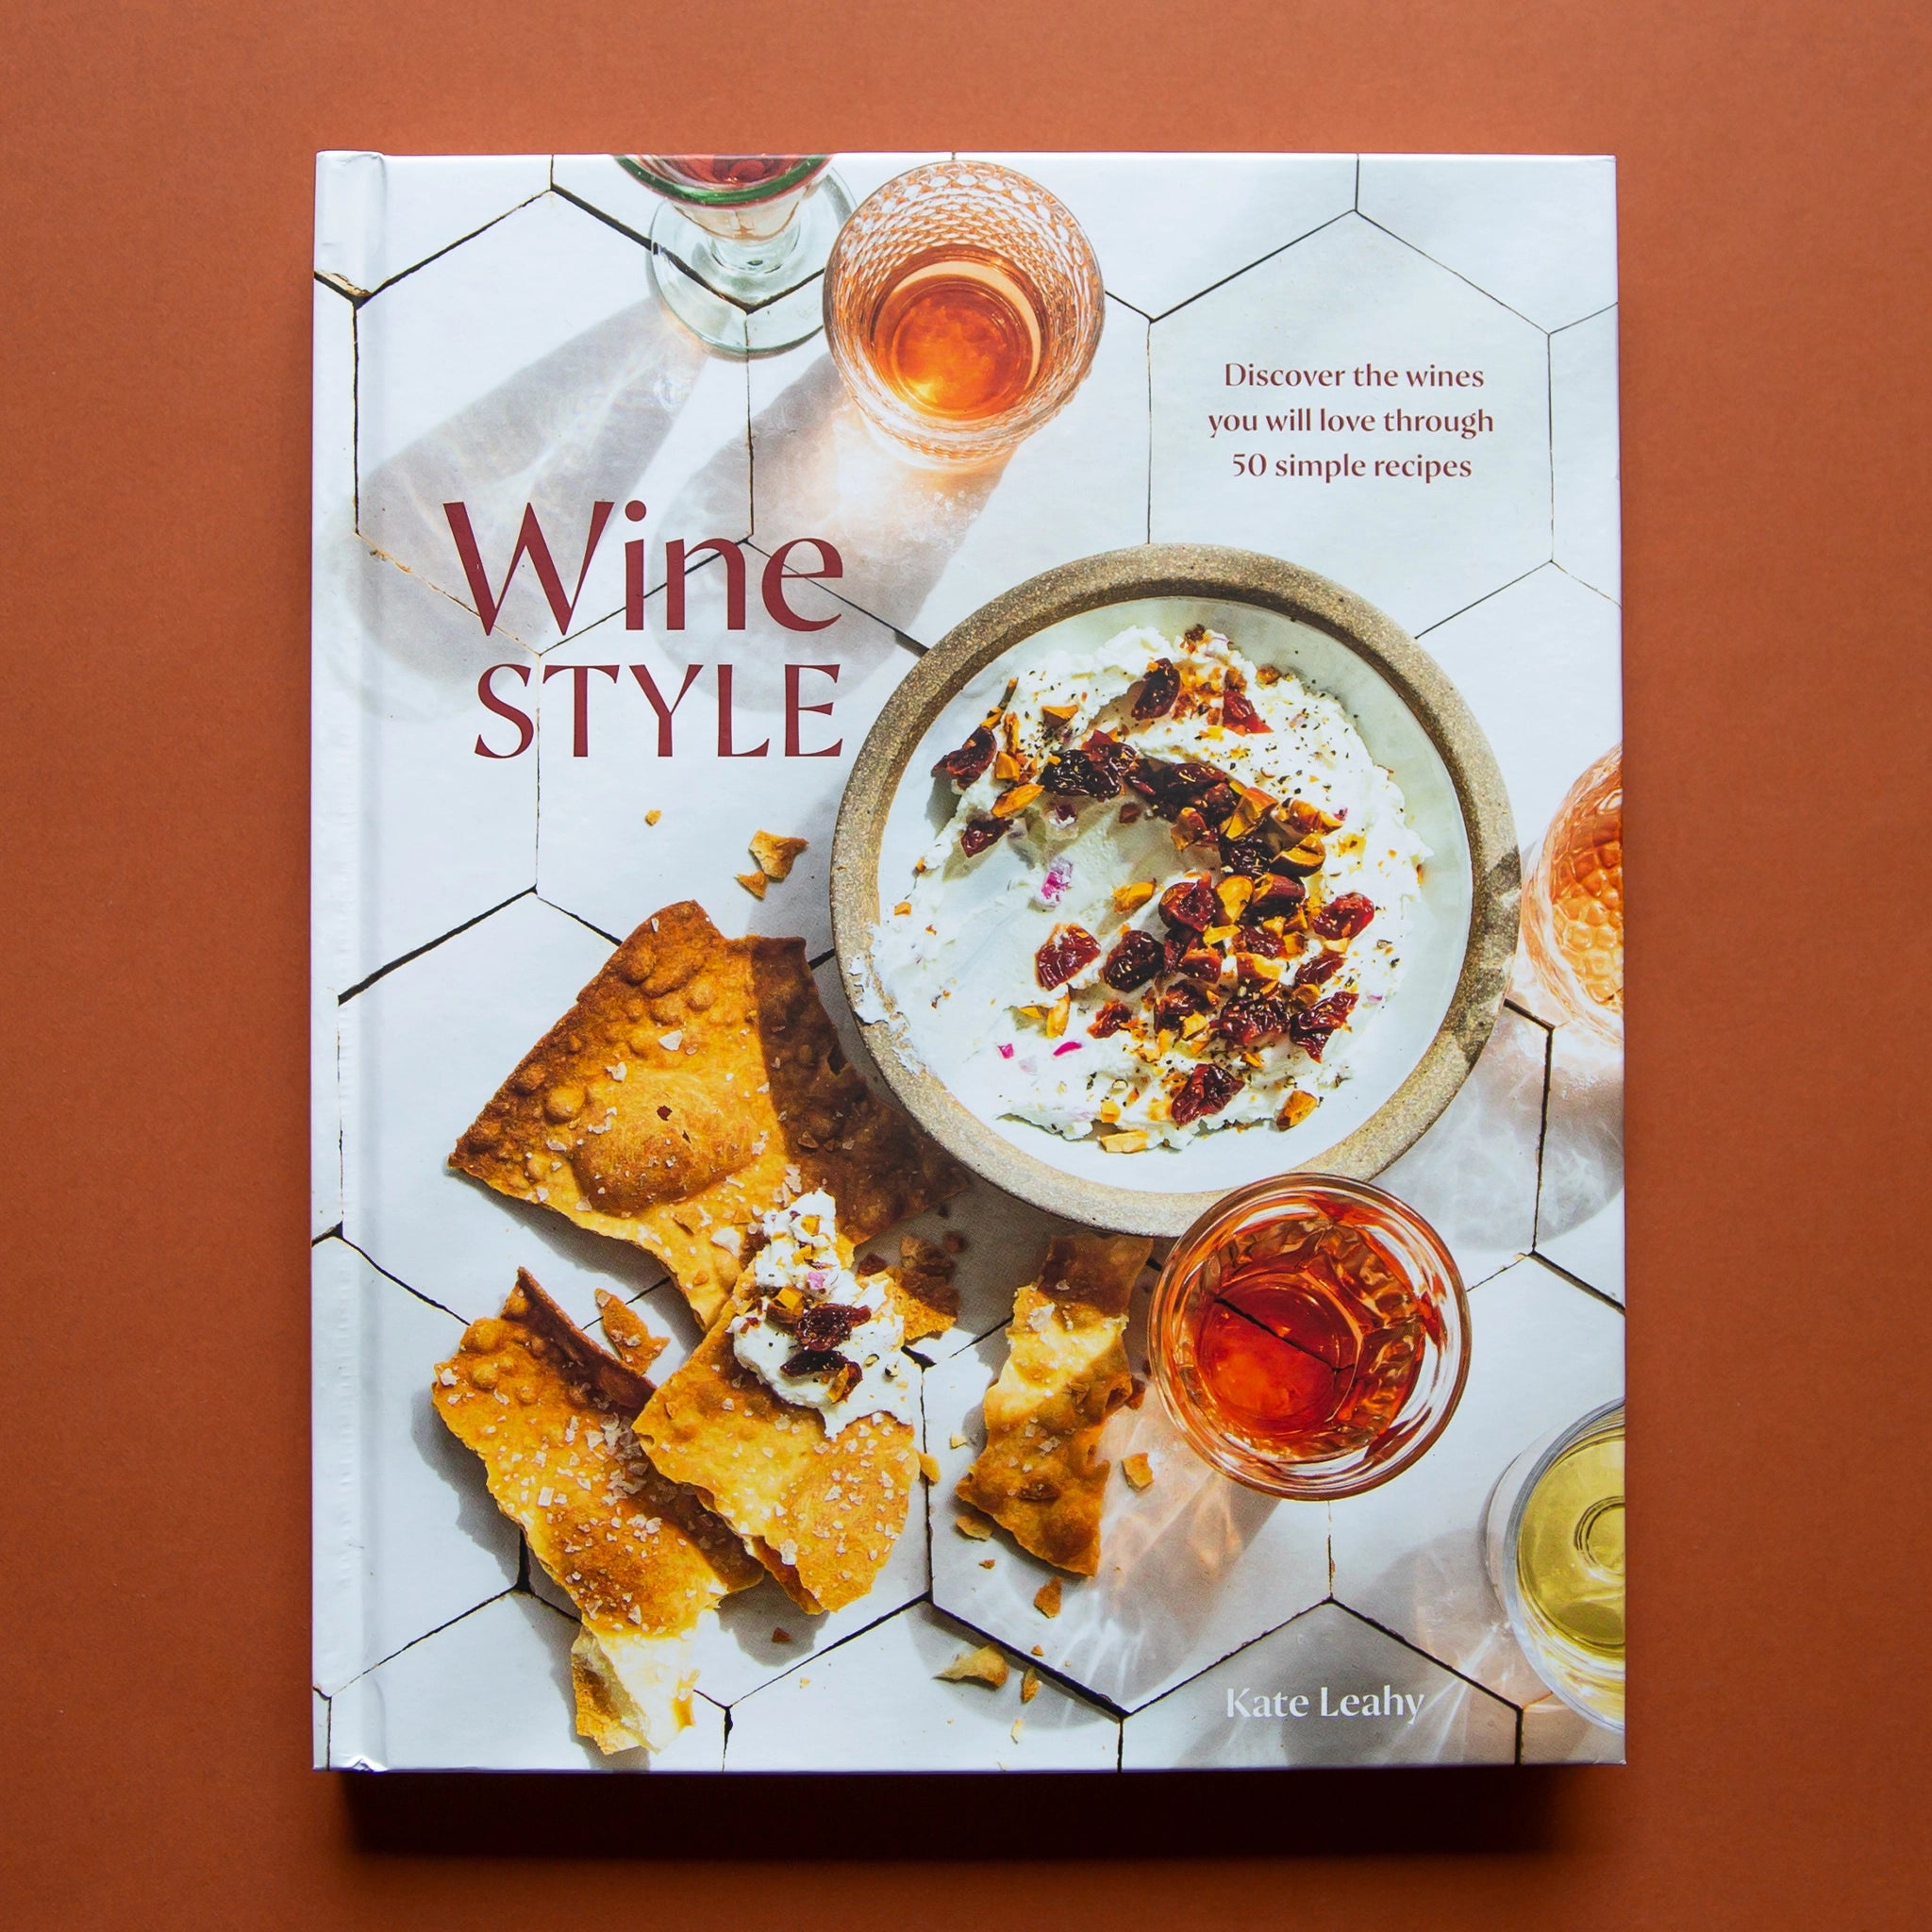 Hard covered cookbook titled &#39;Wine Style: Discover the wines you will love through 50 simple recipes&#39; in red lettering. Book cover features brittle salted crackers and dip along side wine-filled cocktail glasses against white modern tiled.